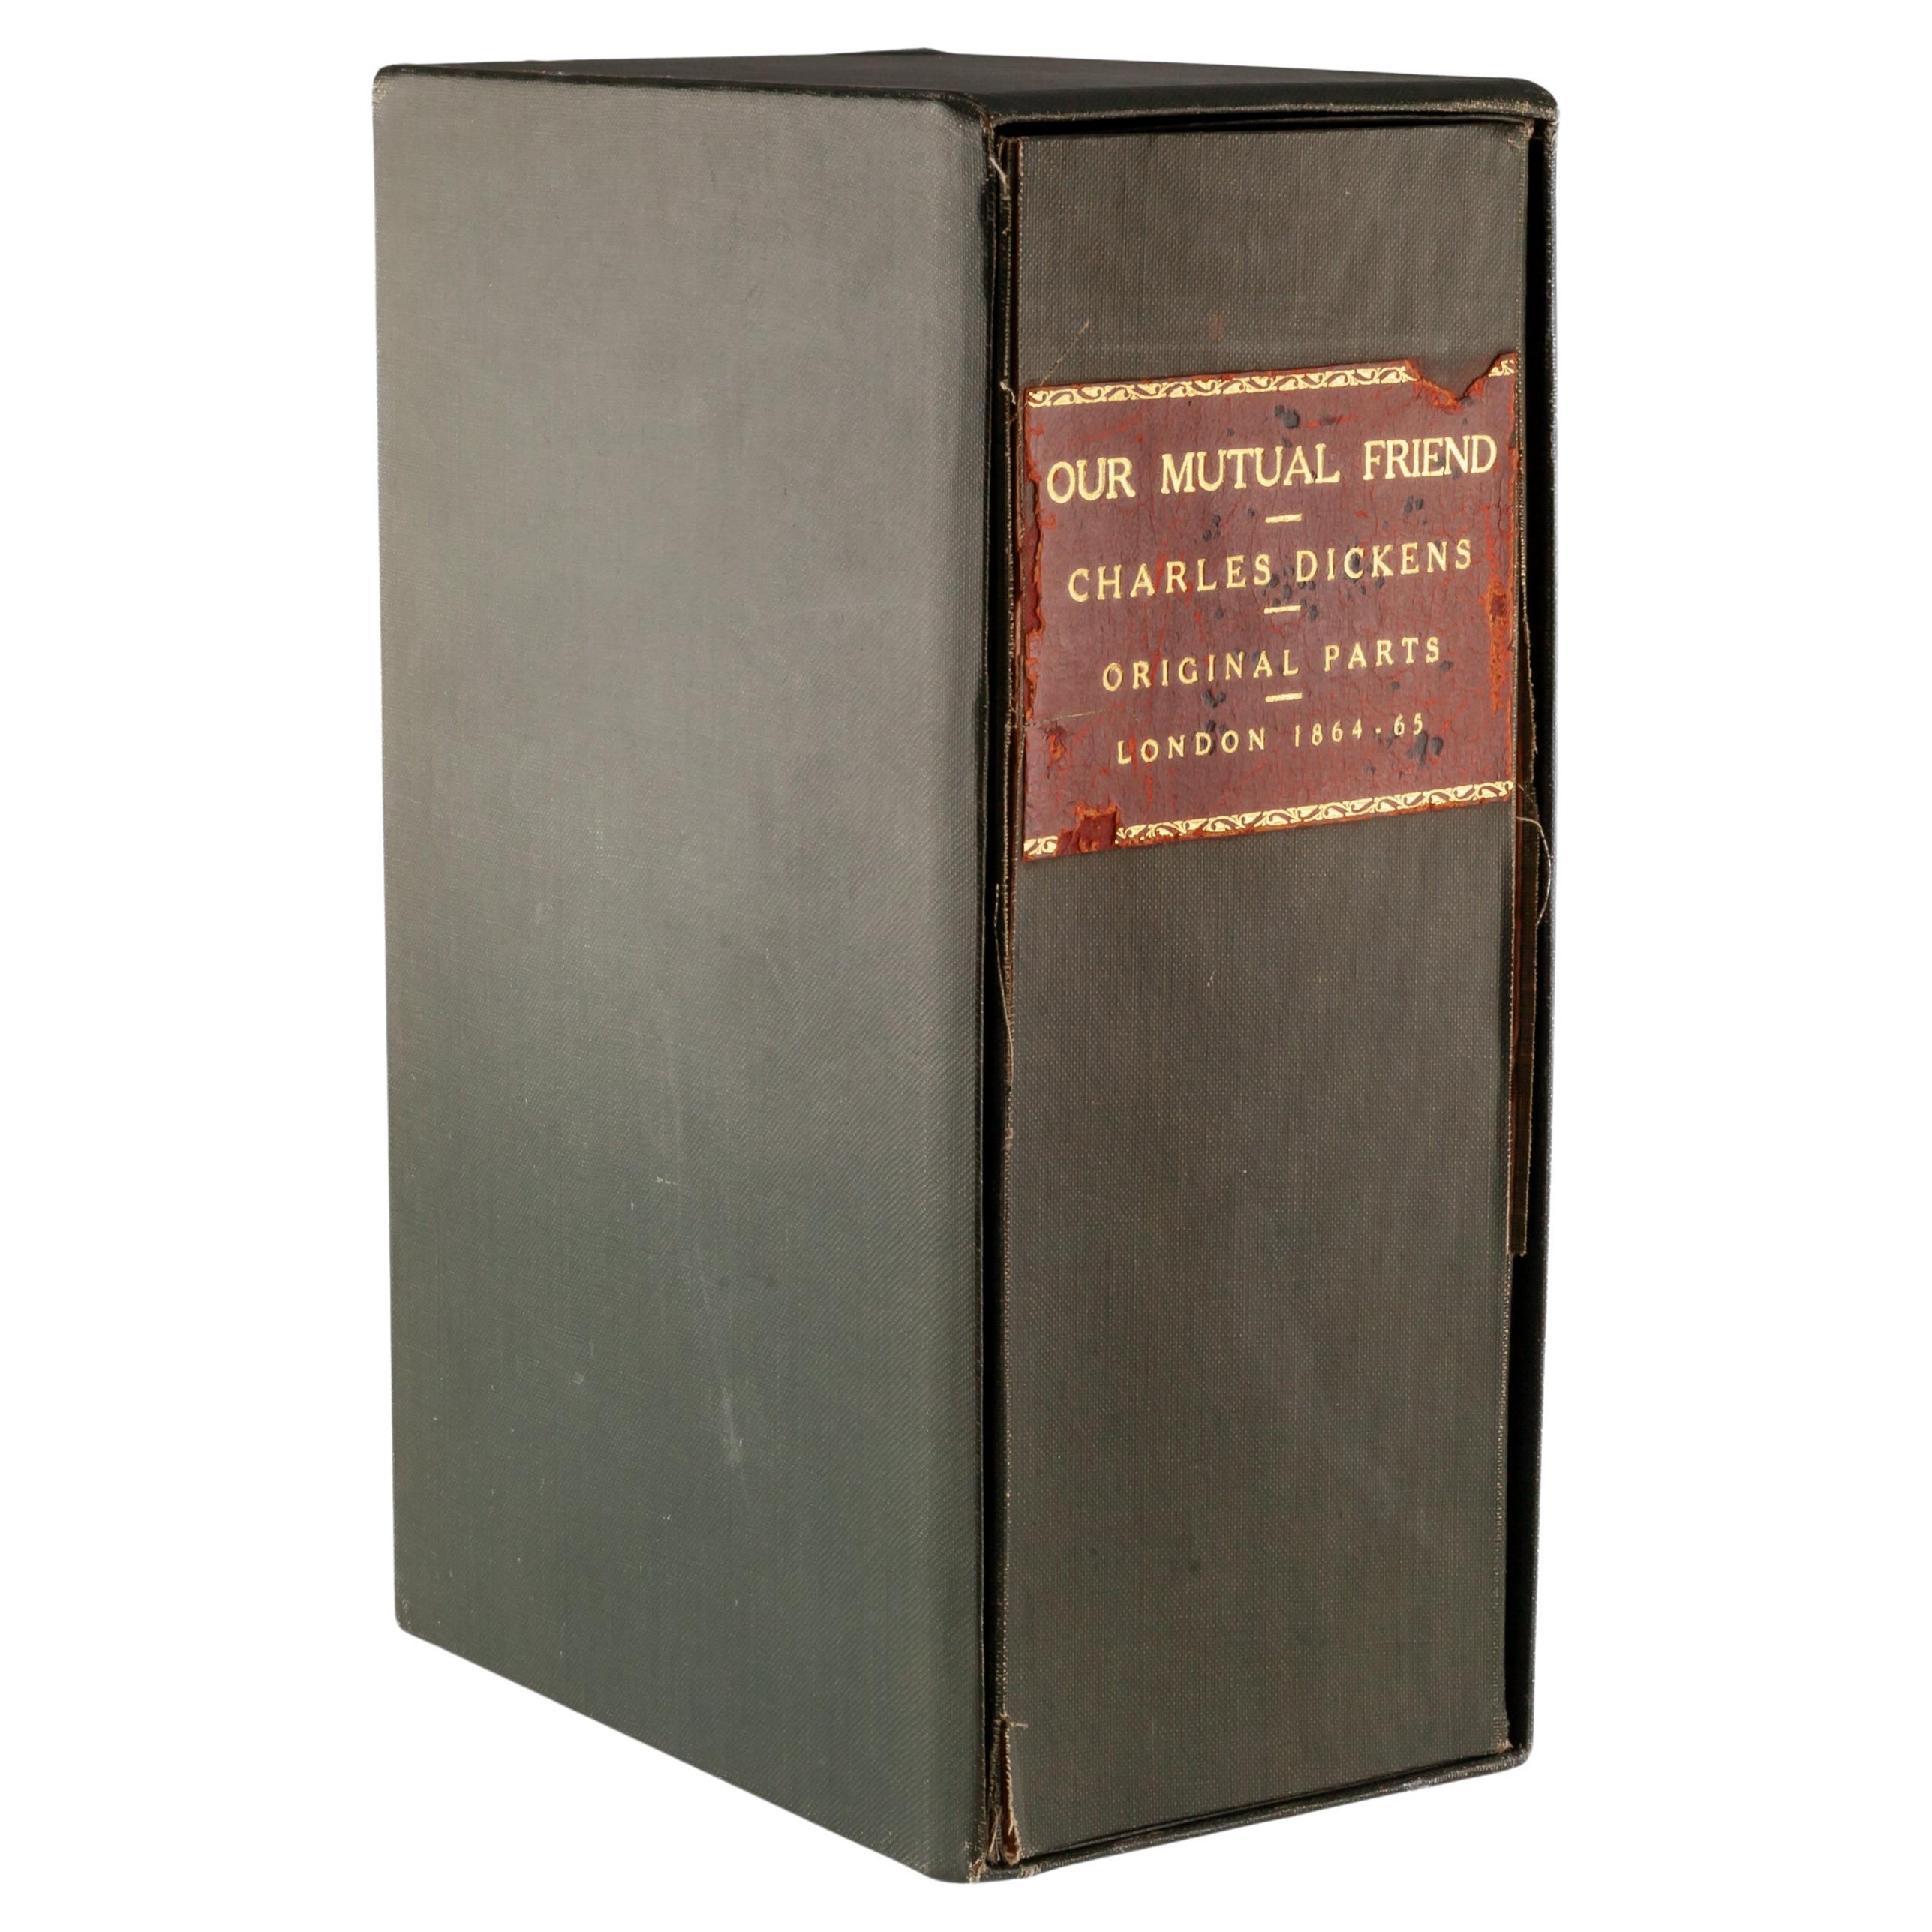 Gorgeous 1st Edition Set of Our Mutual Friend by Charles Dickens
Includes 20 Volumes in 19 Issues (Volume 19 and 20 in Final Issue)
Includes Hardcase for Storage
Issues are in nice antique condition. Some fraying and discoloration. See photos for